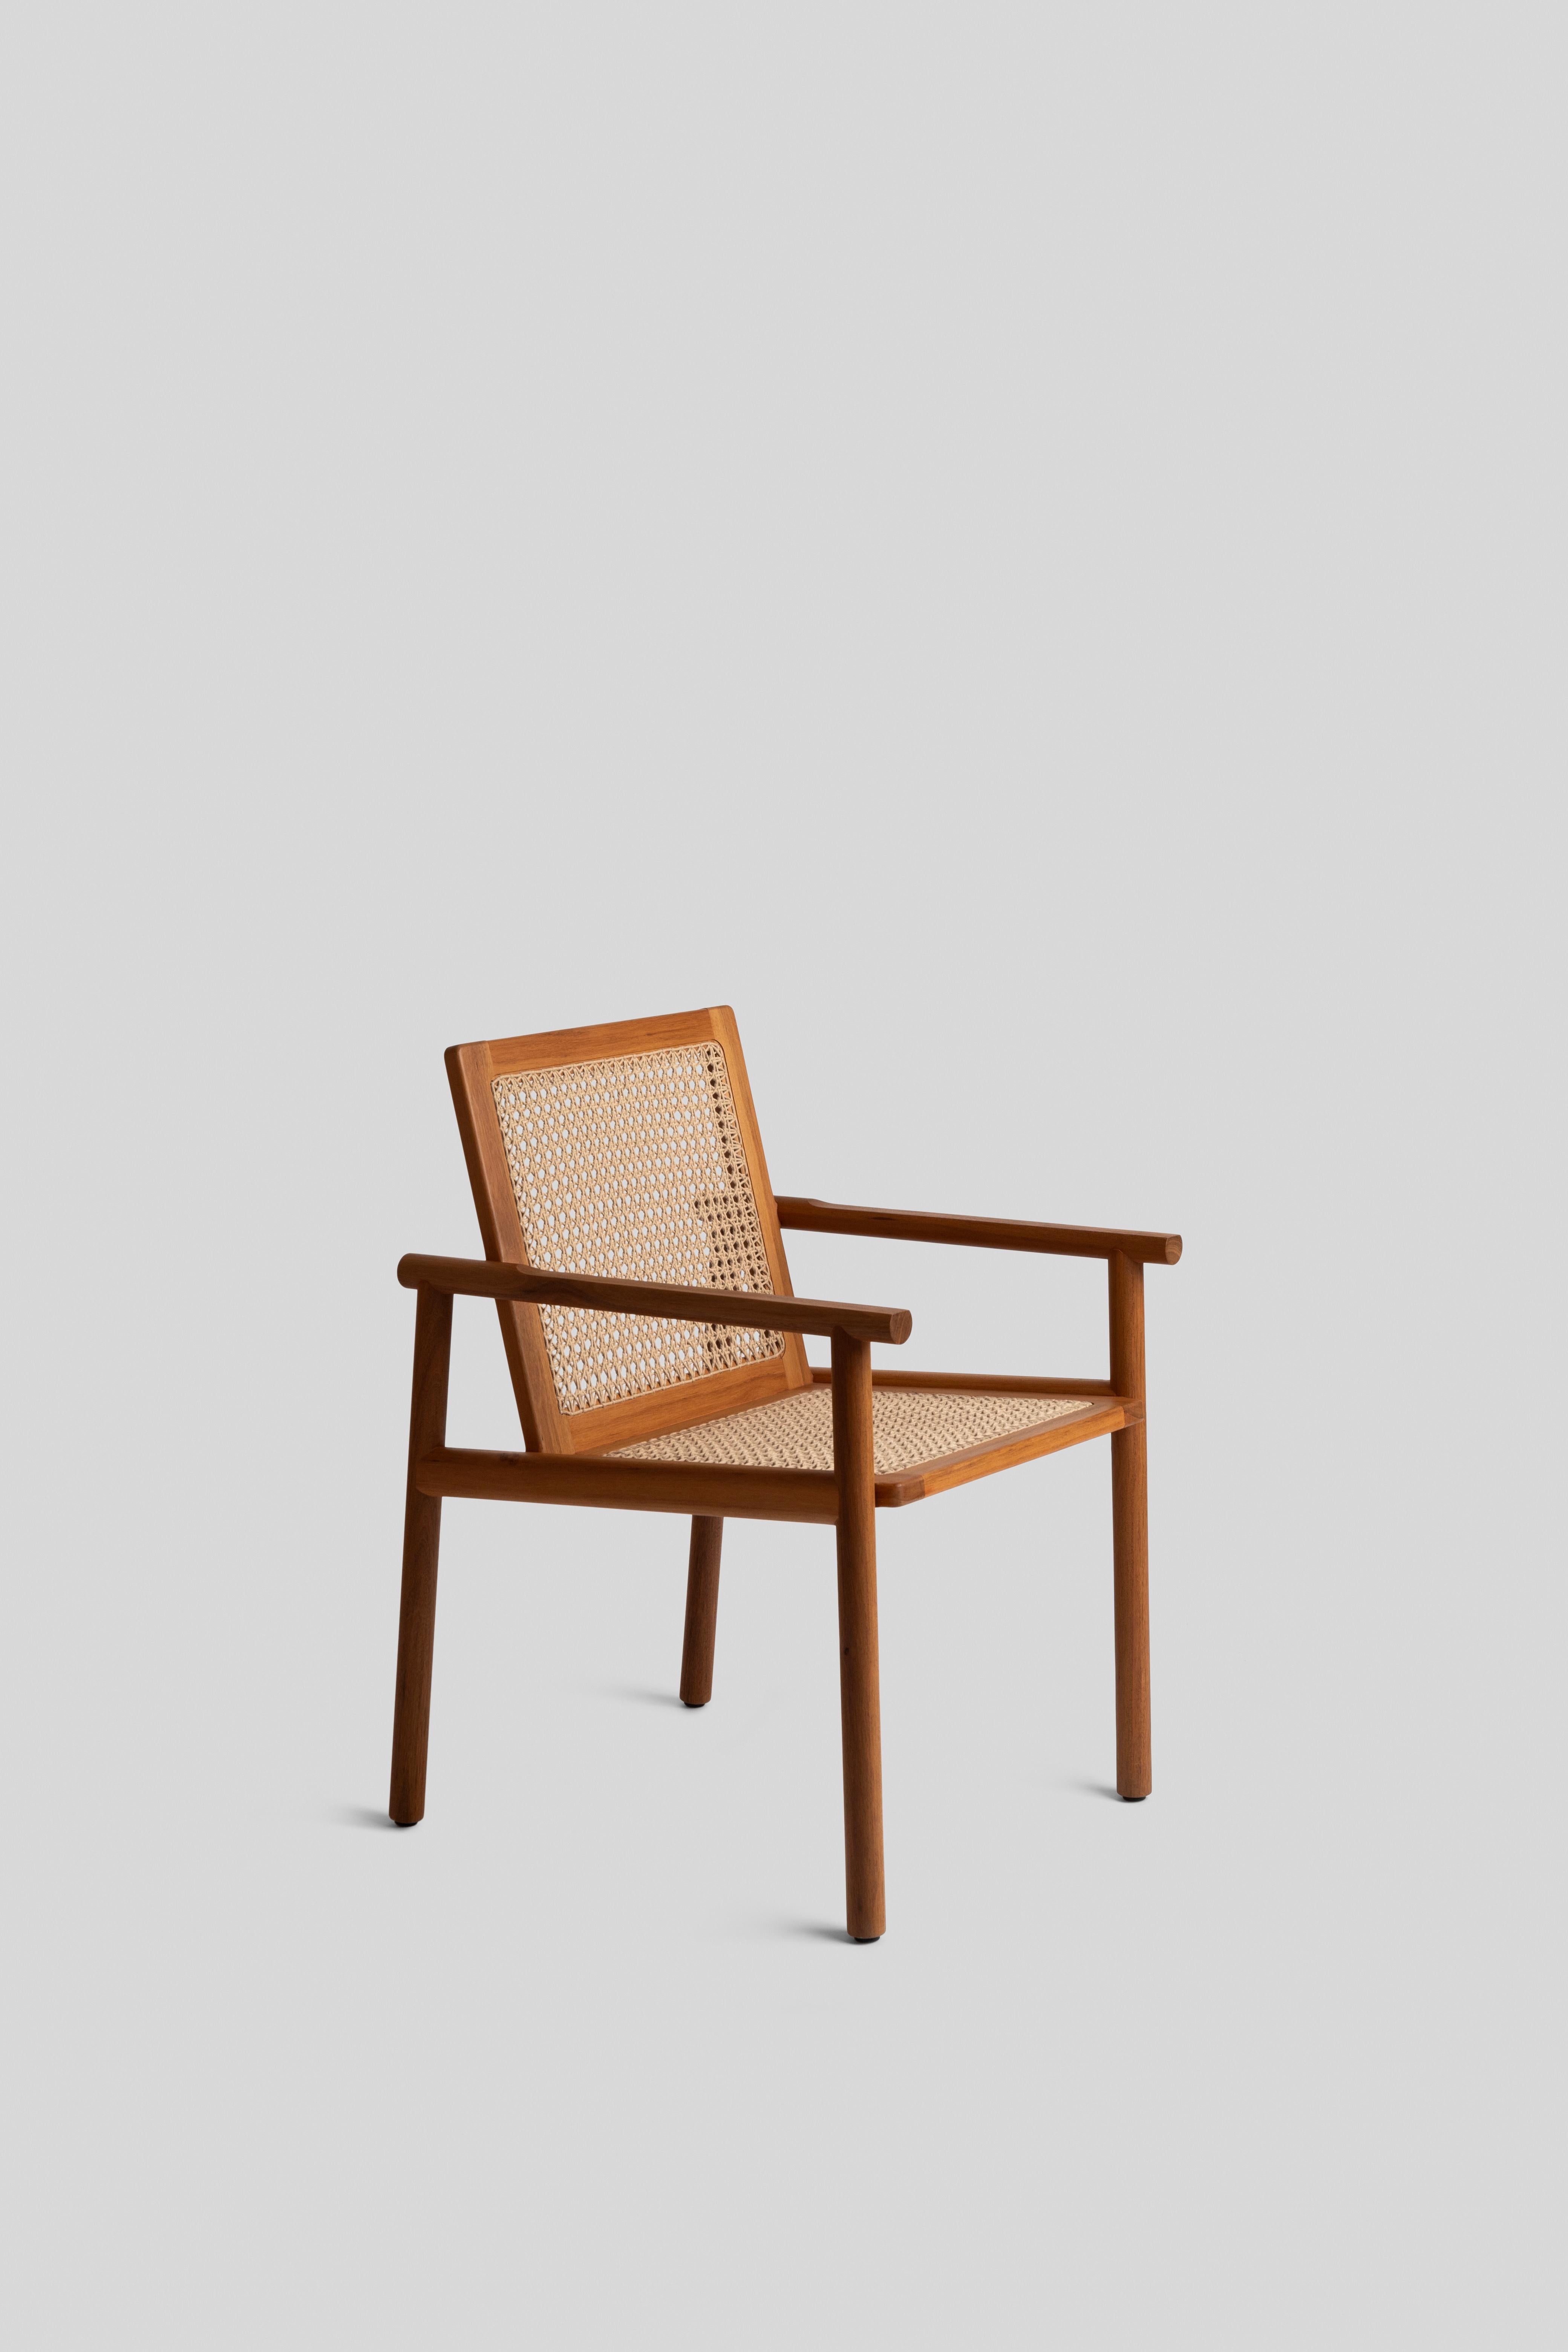 The armchair has a simple and very lightweight structure. Its clean lines, with smooth and rounded edges, blend with the meticulous handwoven pattern. In this handwoven fabric, crafted by a family of artisans from Bacalar, Mexico, the 